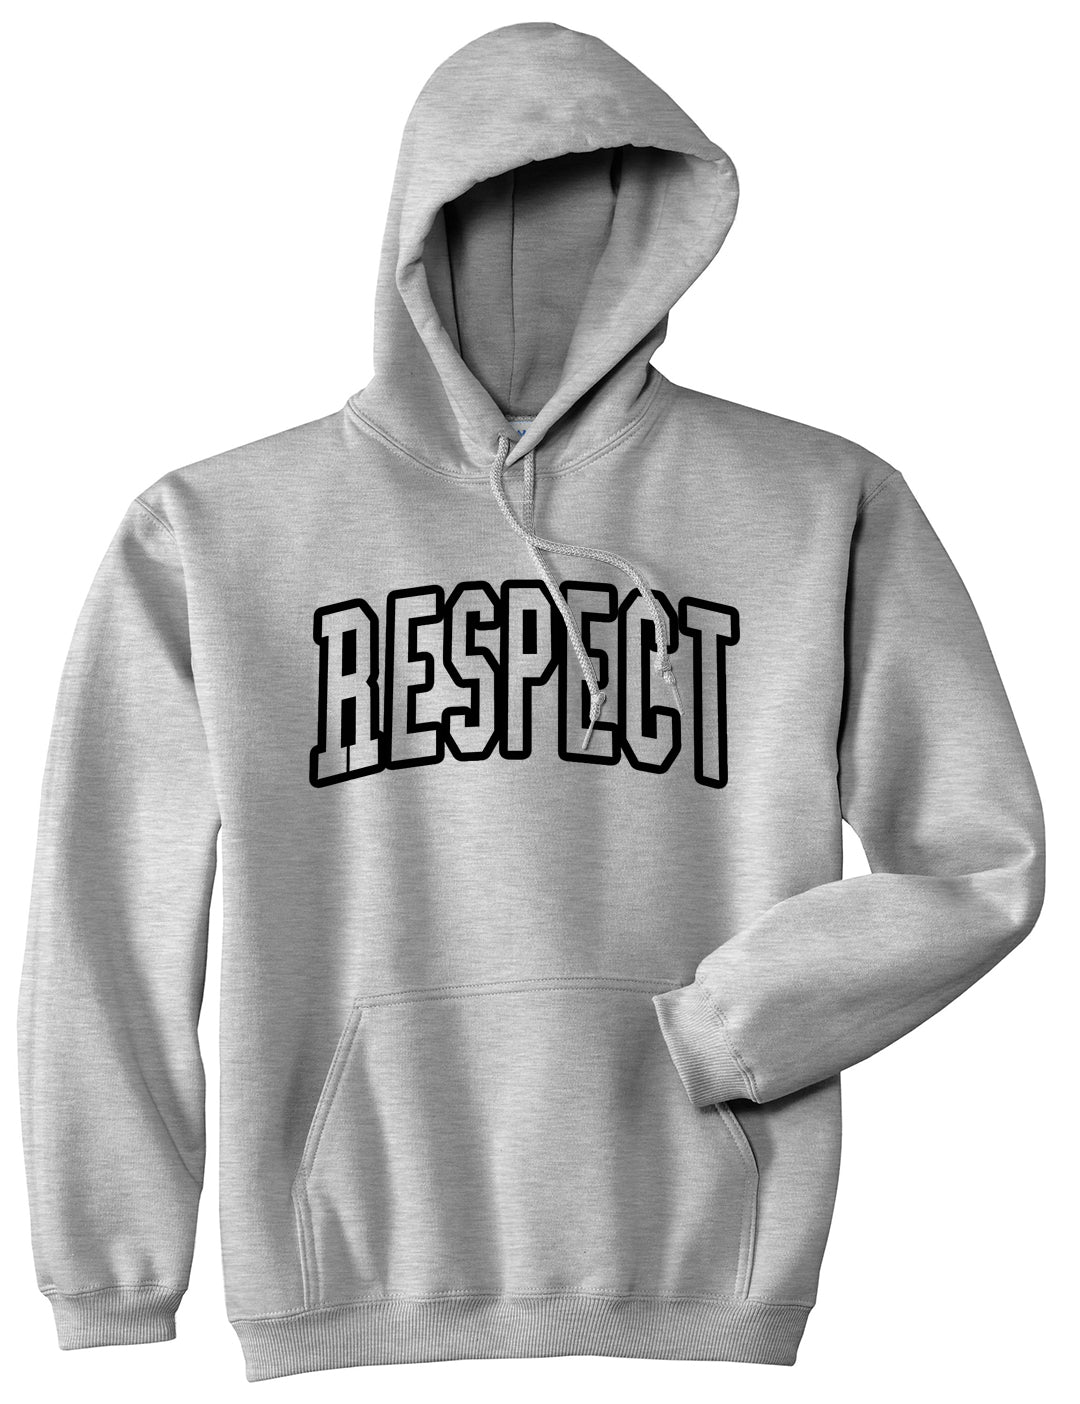 Respect Outline Mens Pullover Hoodie Grey